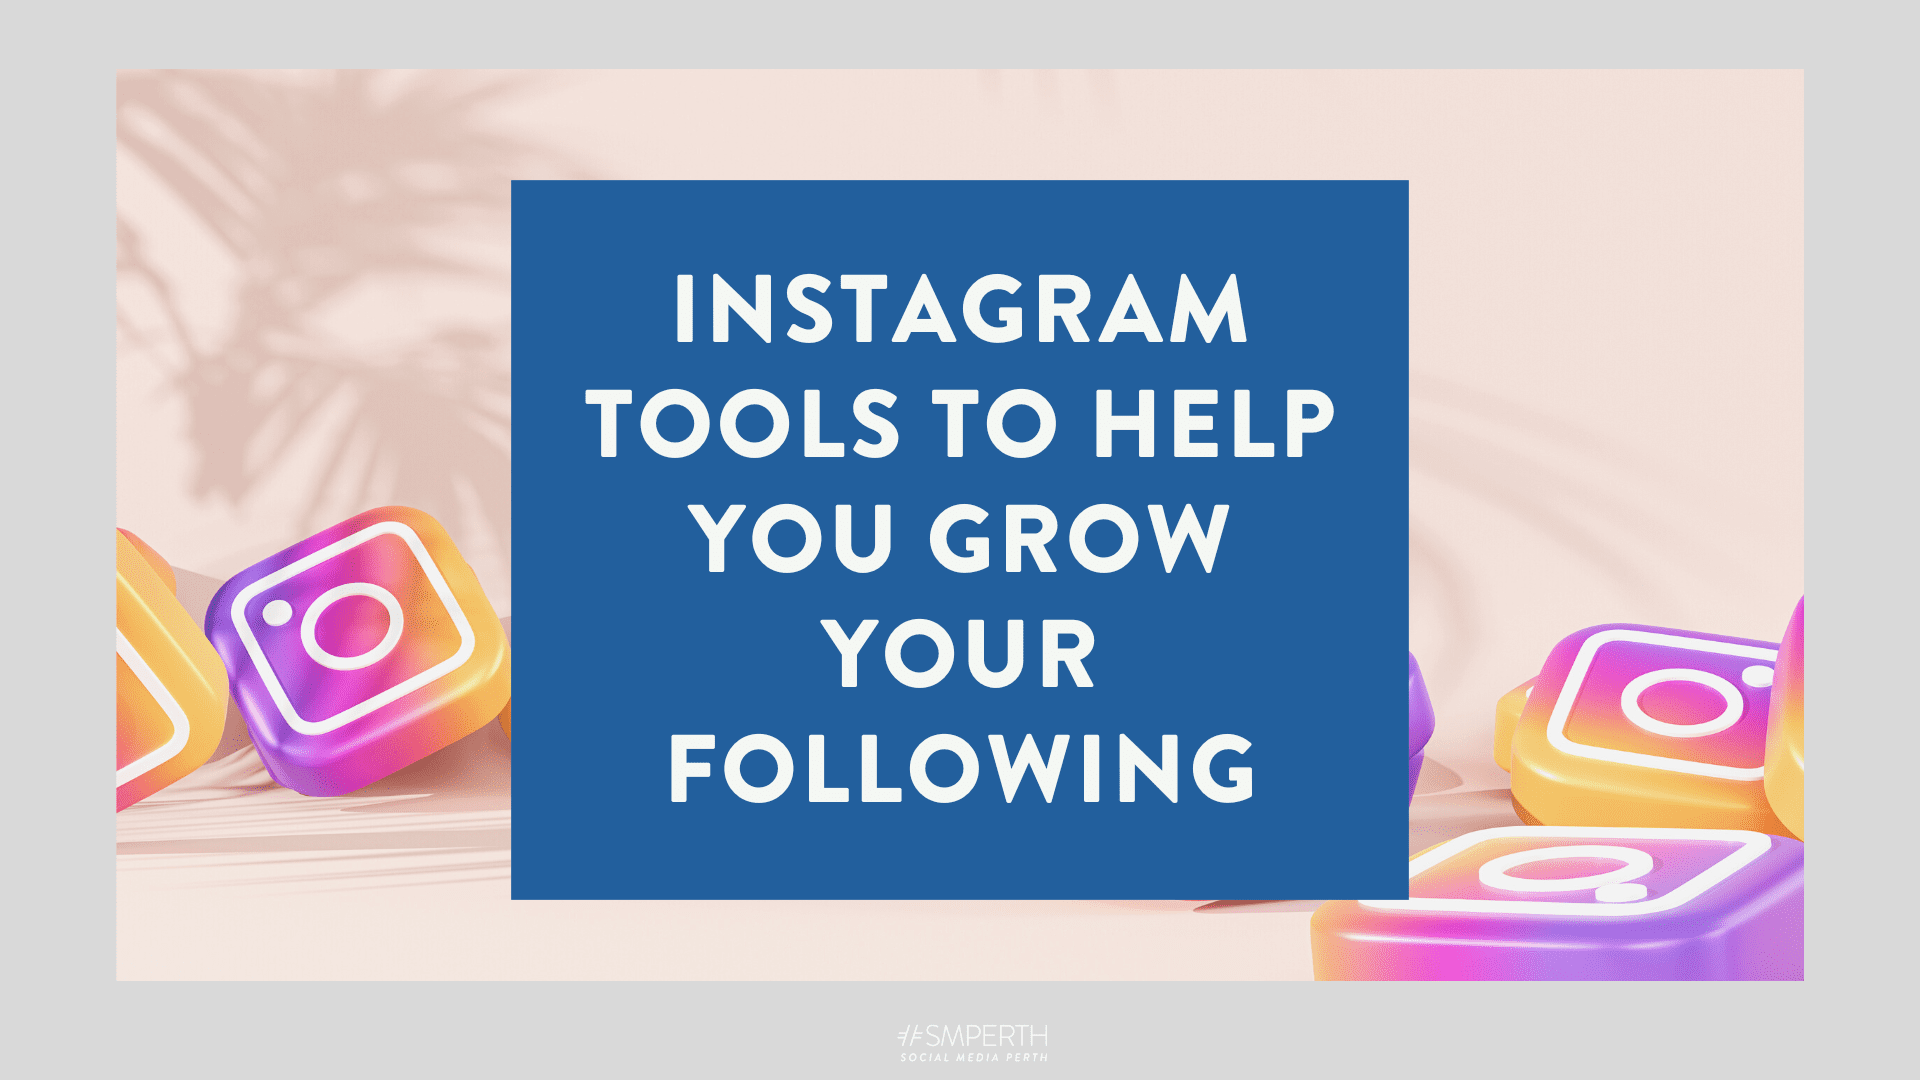 Instagram Tools to Help You Grow Your Following